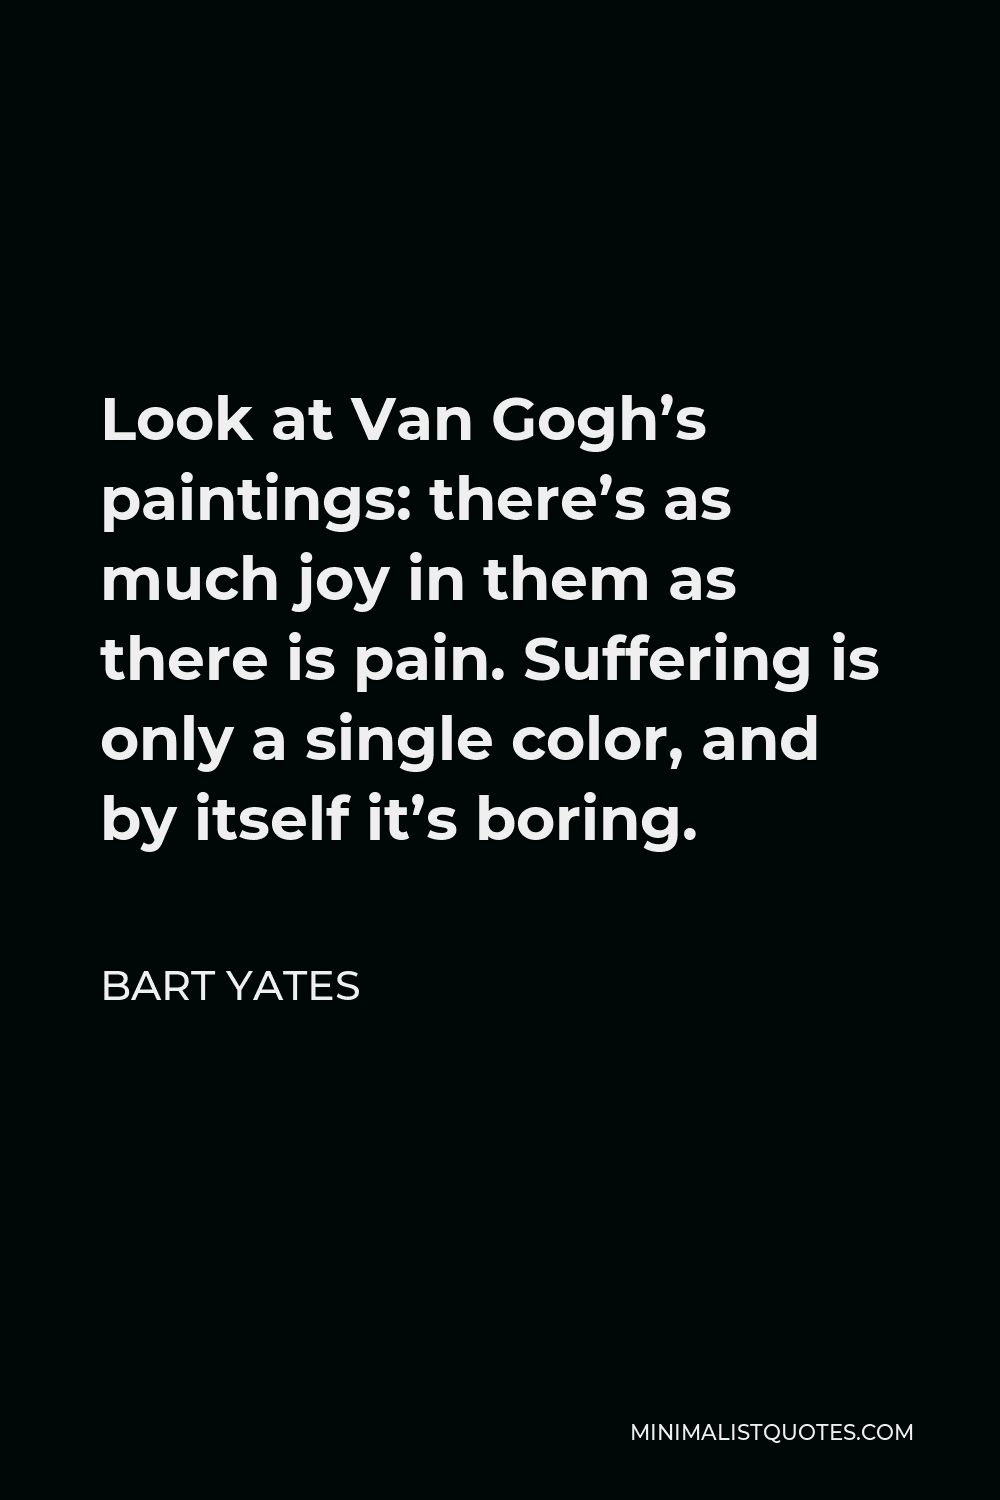 Bart Yates Quote - Look at Van Gogh’s paintings: there’s as much joy in them as there is pain. Suffering is only a single color, and by itself it’s boring.